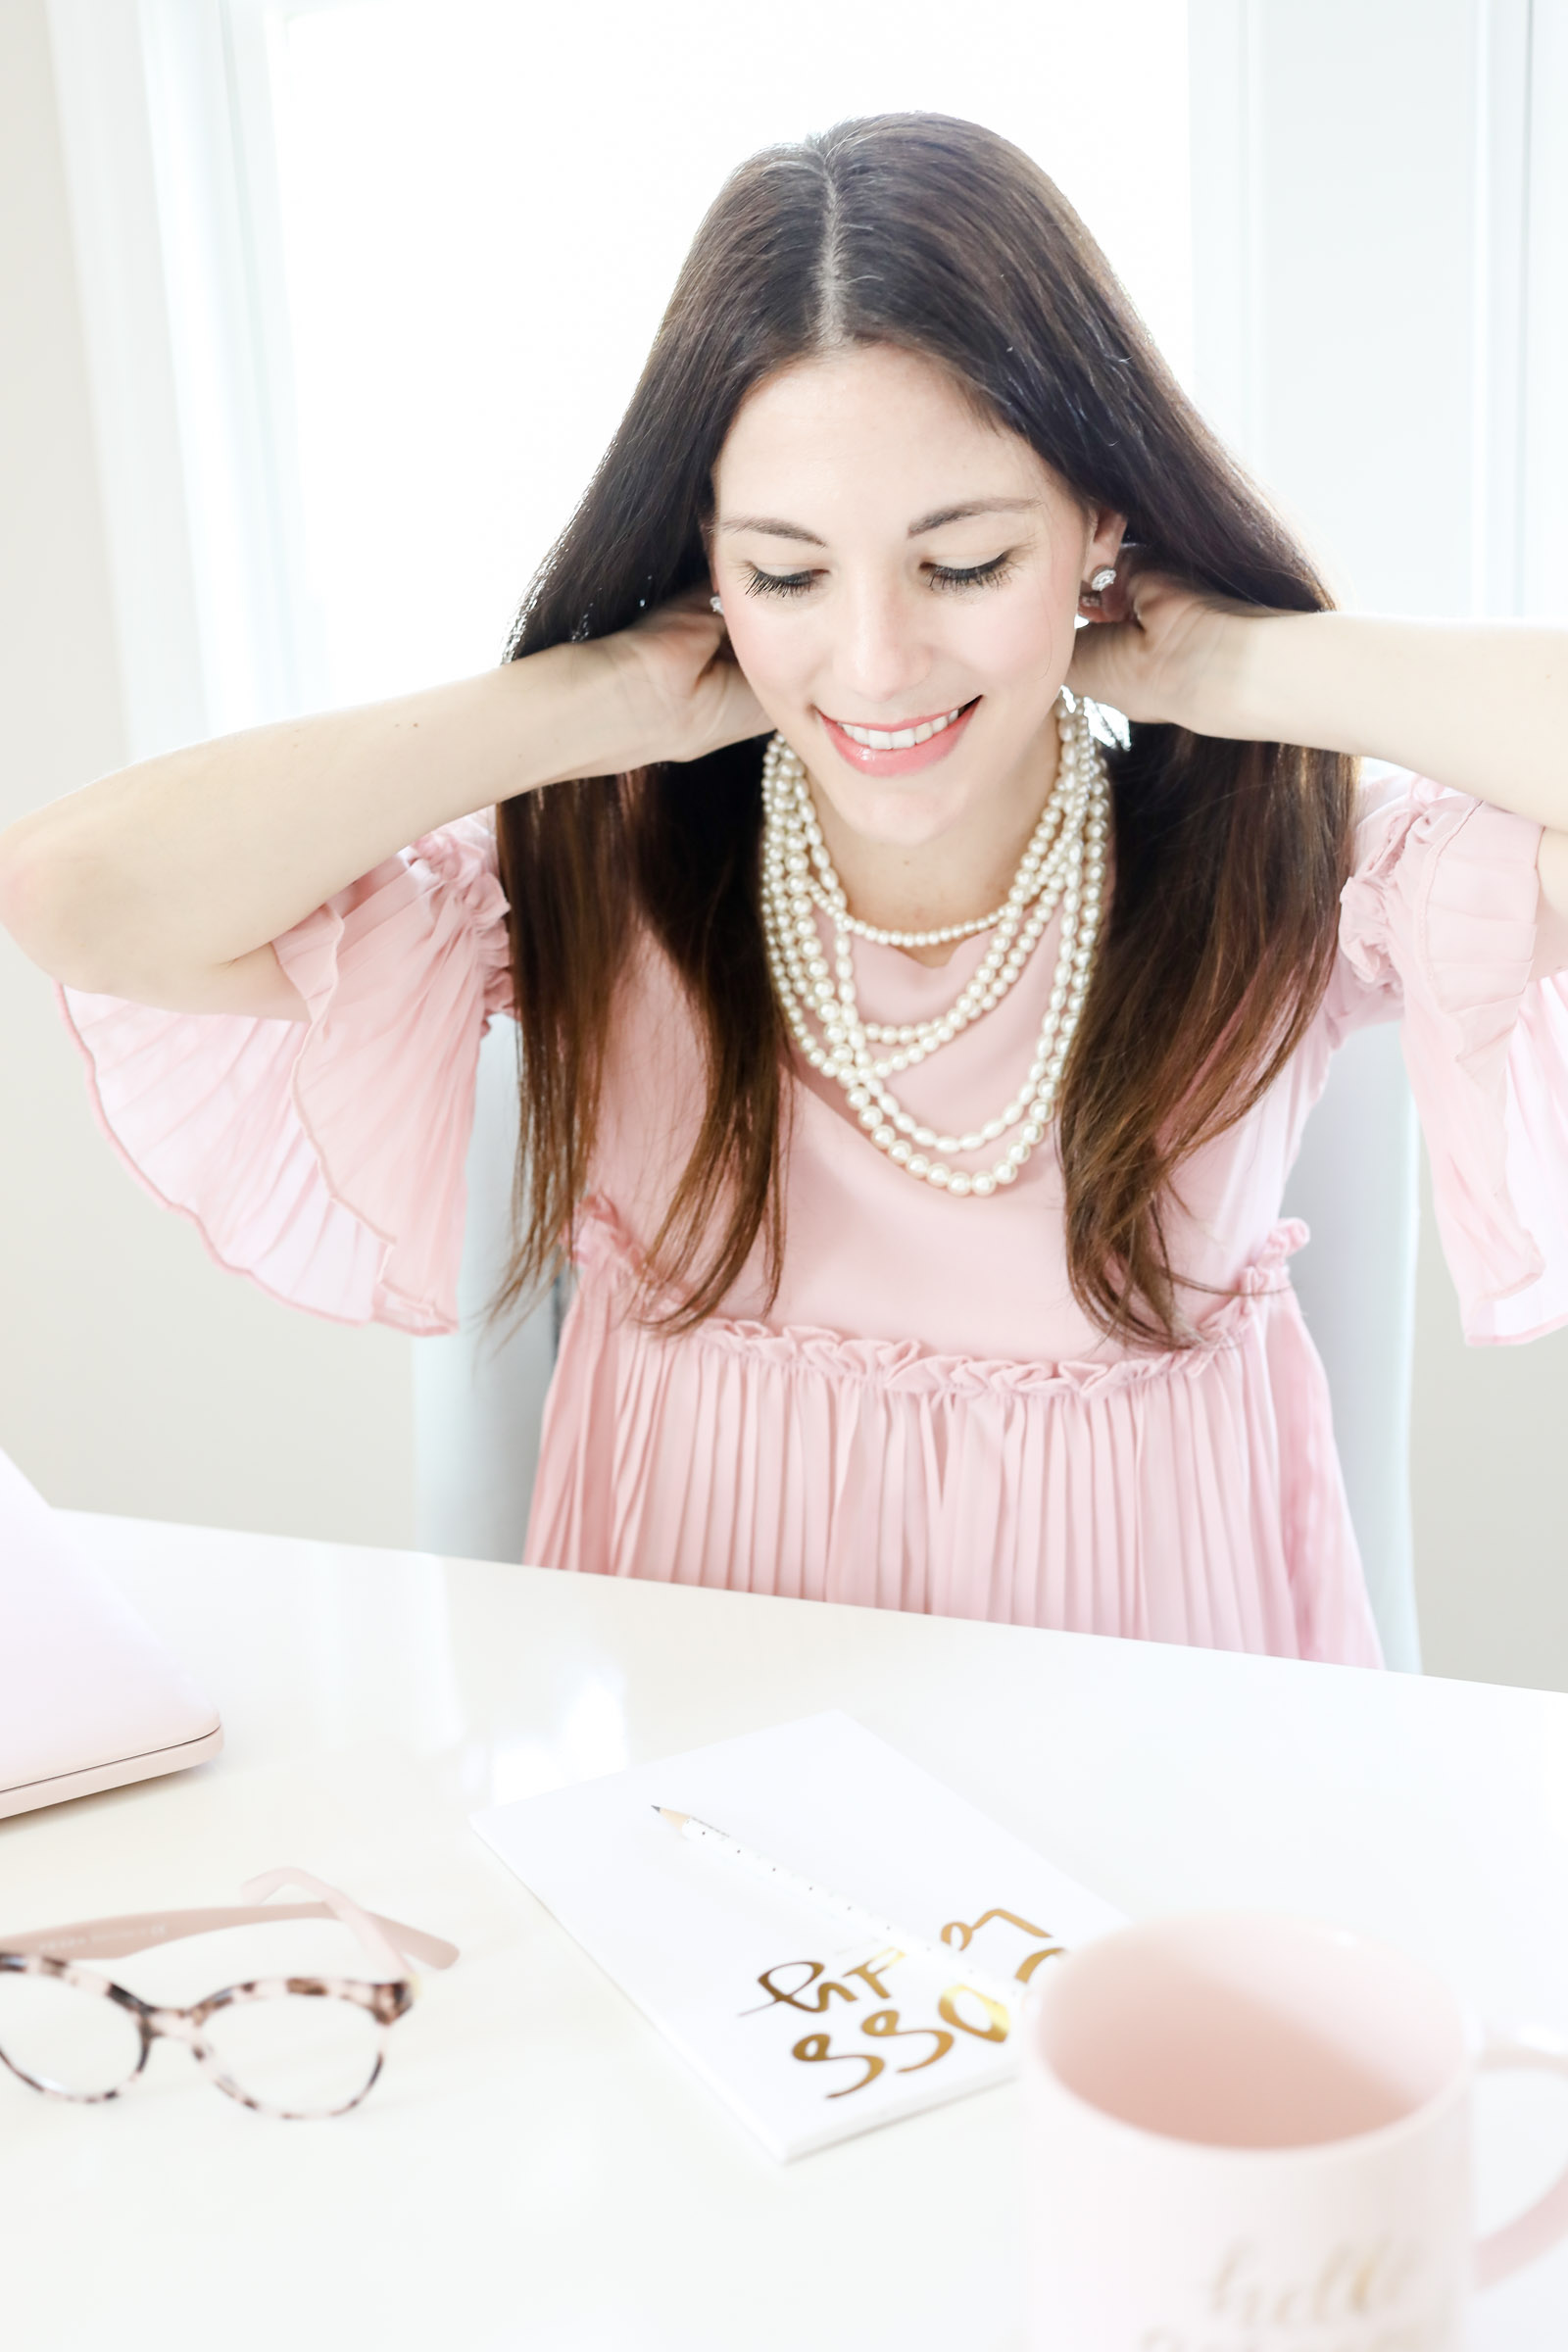 pearl layered necklace | pink nail polish | cute bow shoes | pineapple earrings | Summer accessories | pink and pearls | every day joie by elle bowes